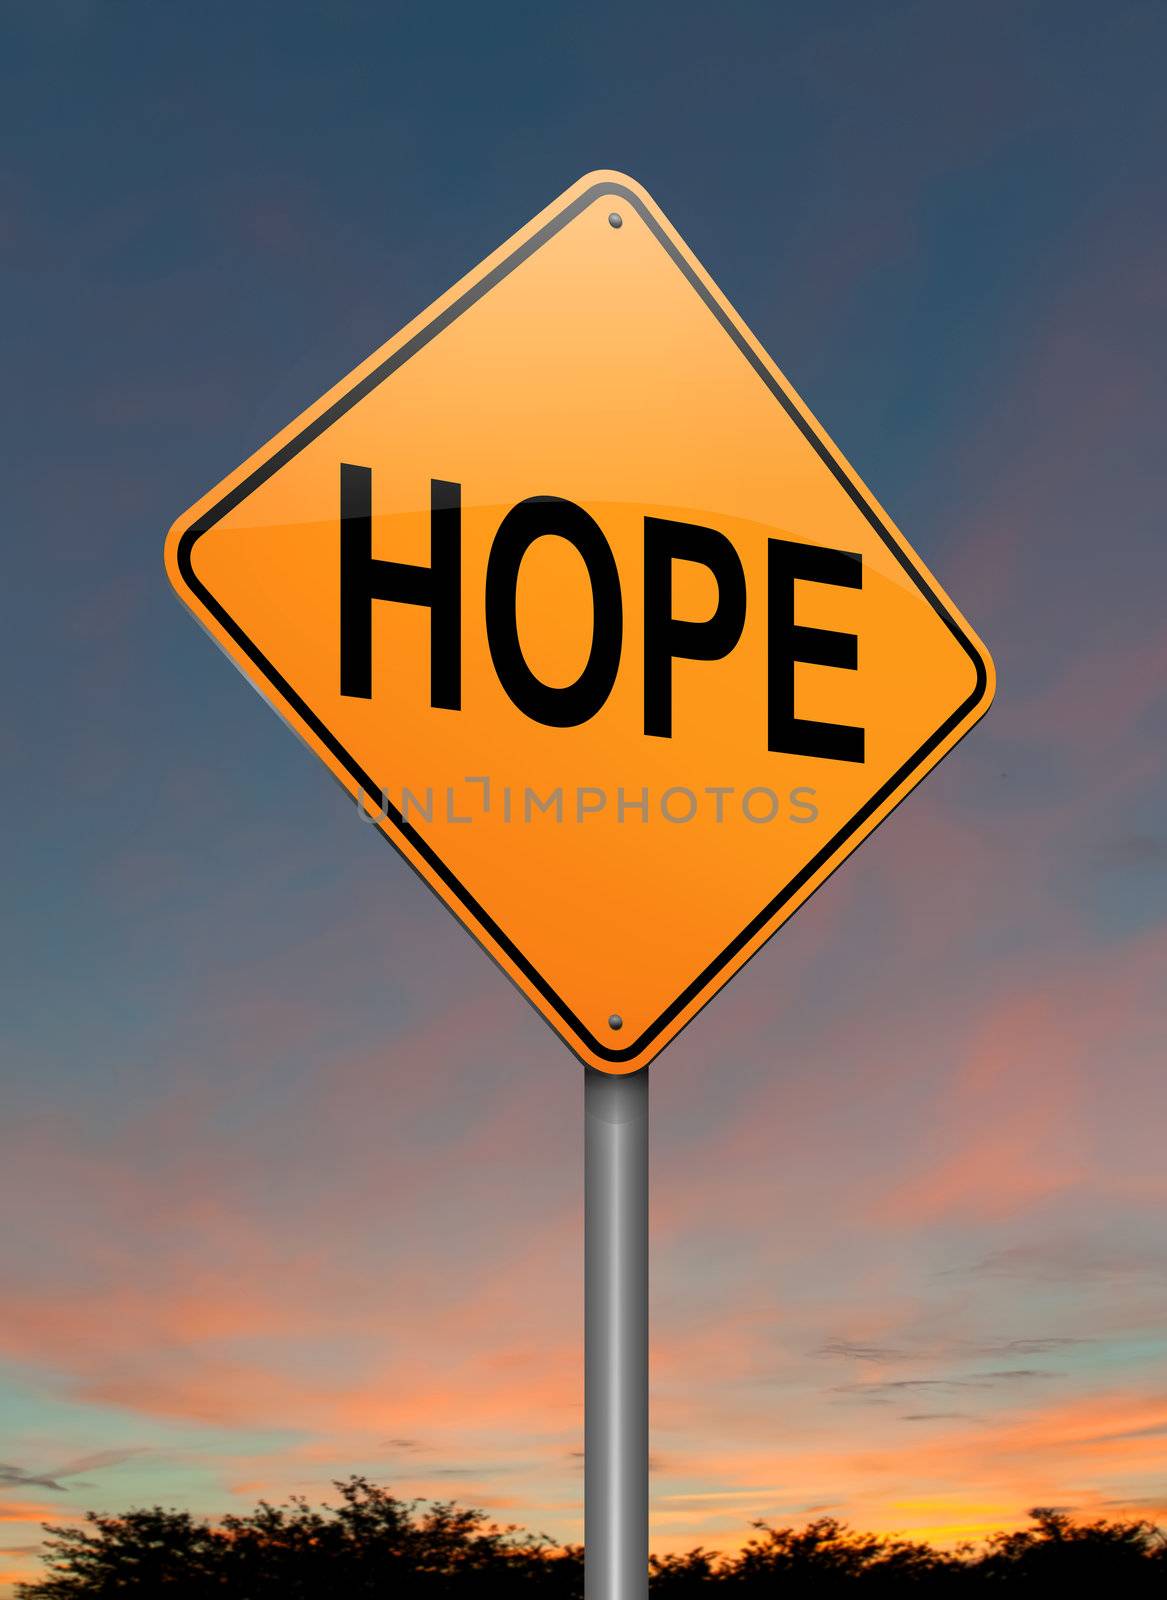 Illustration depicting a roadsign with a hope concept. Sunset background.